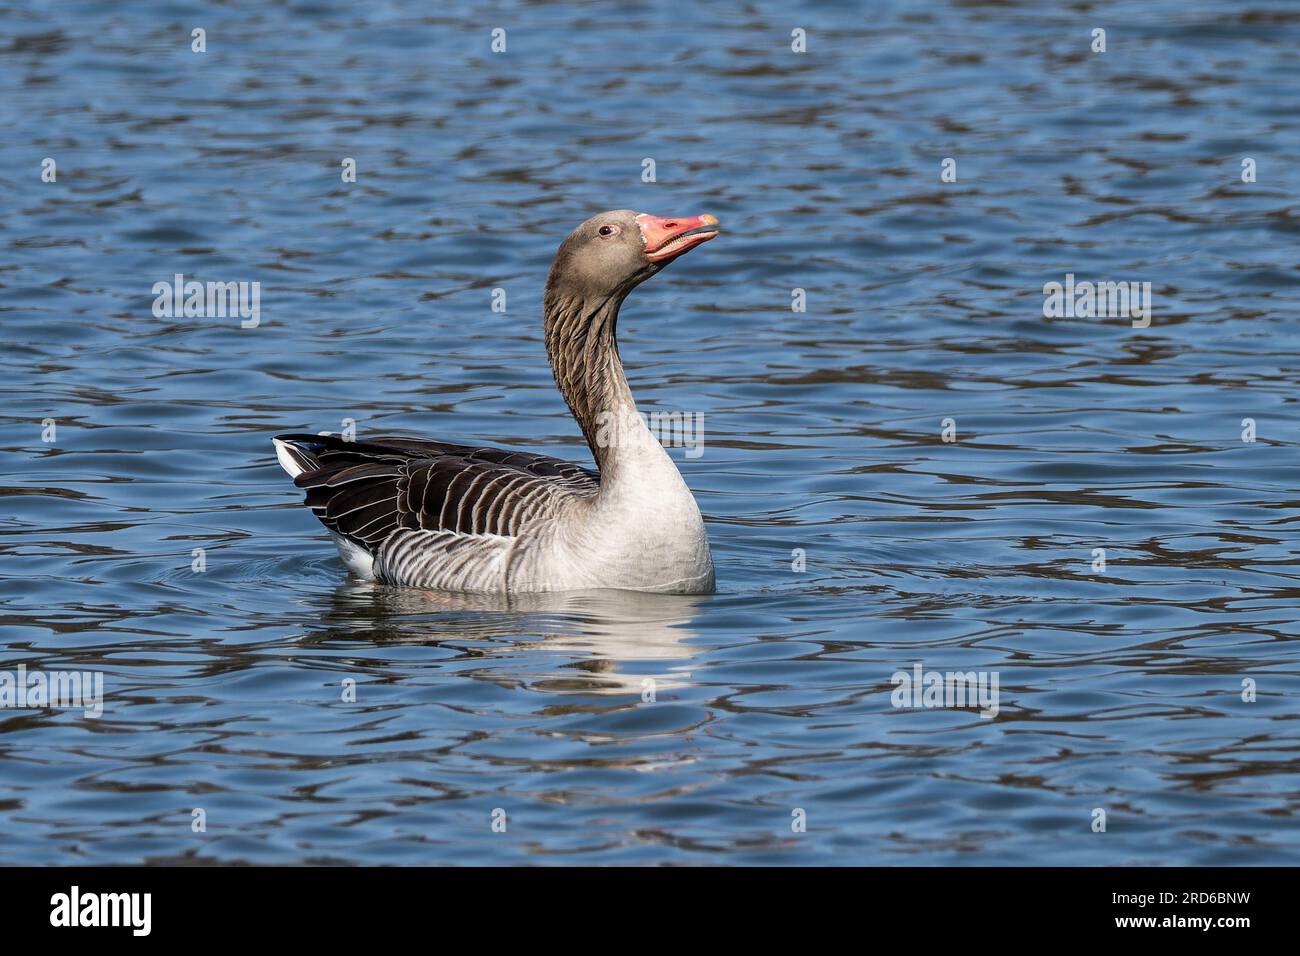 The greylag goose, Anser anser is a species of large goose in the waterfowl family Anatidae and the type species of the genus Anser. Stock Photo